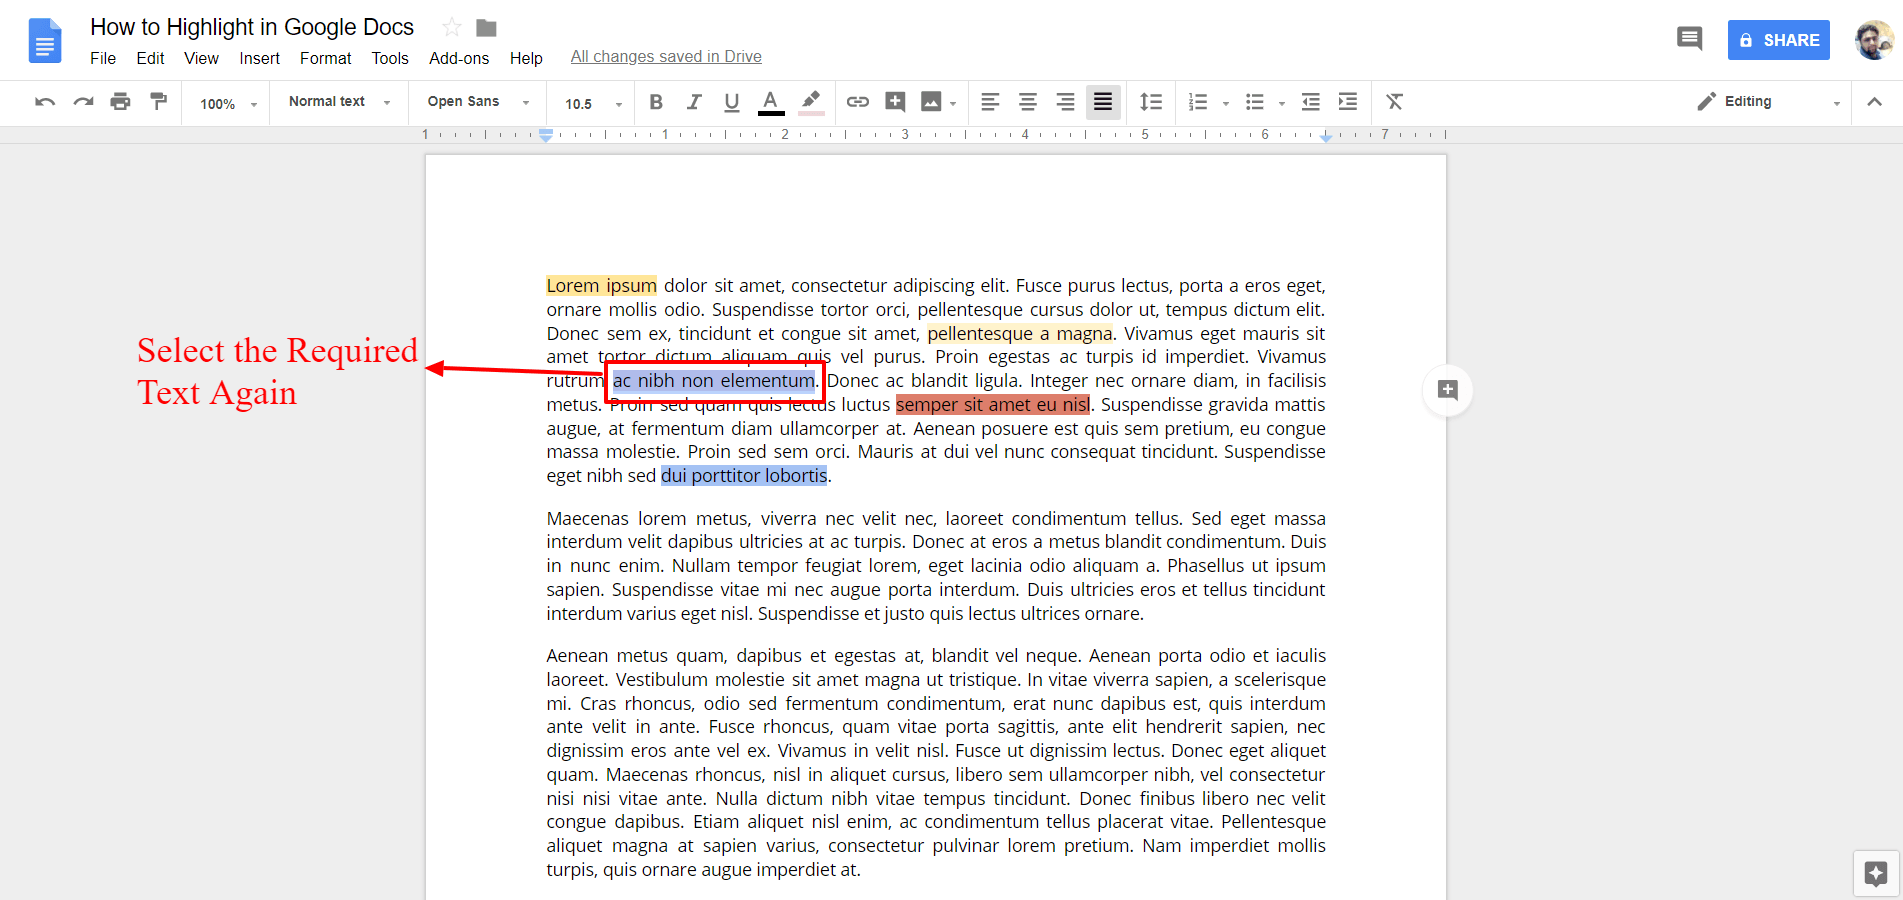 How to Highlight in Google Docs? Explained Steps With Pictures